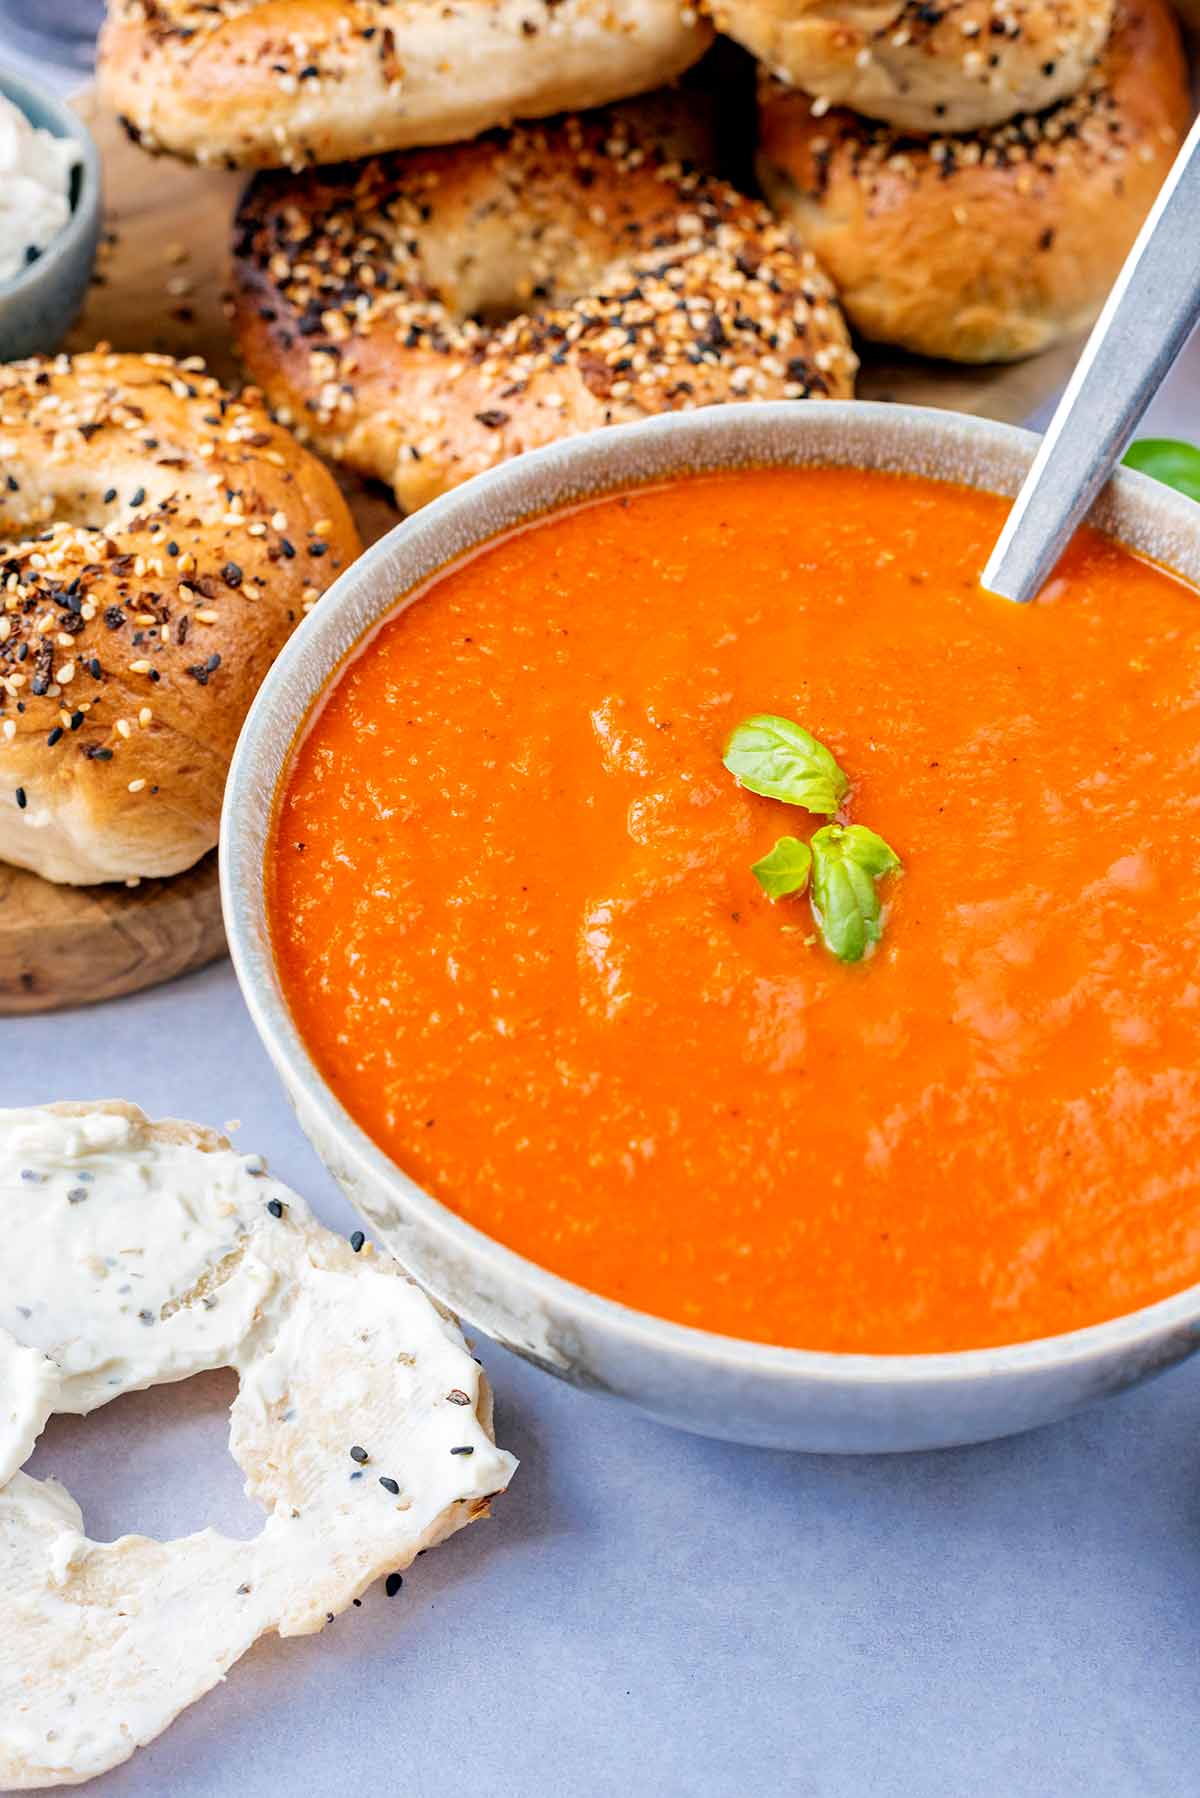 Tomato soup in a bowl with a spoon in front of some seeded bagels.